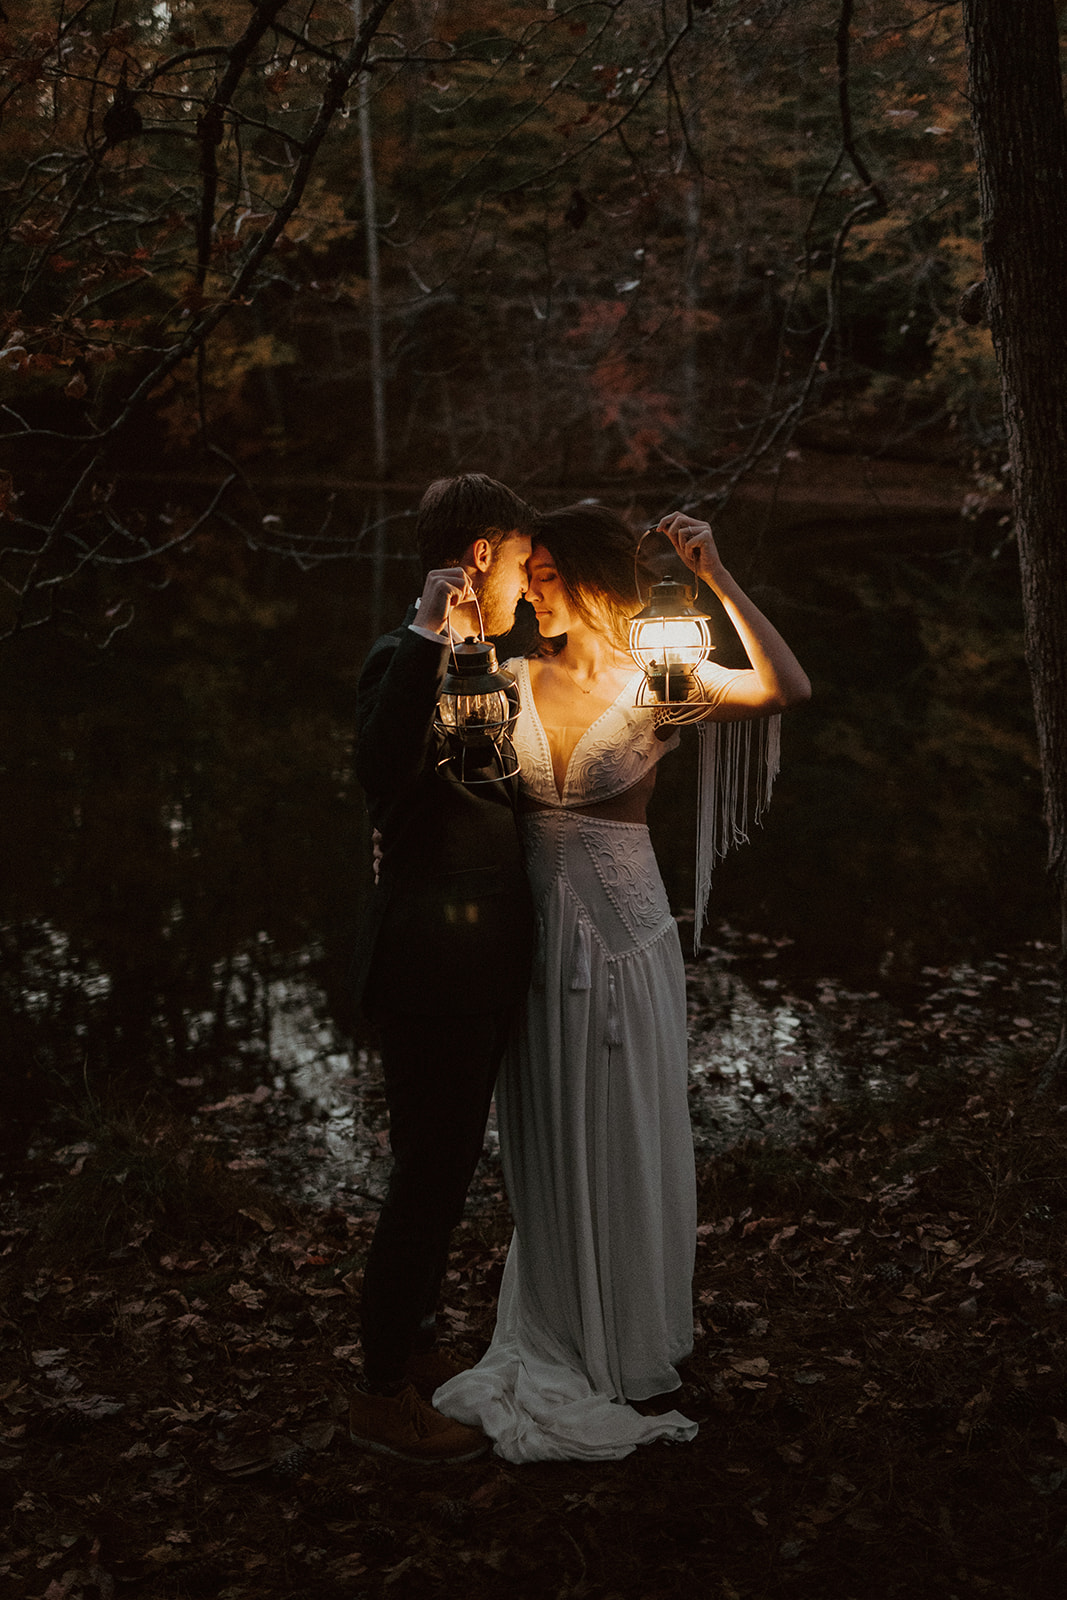 the couple touching their foreheads that evening with their lanterns